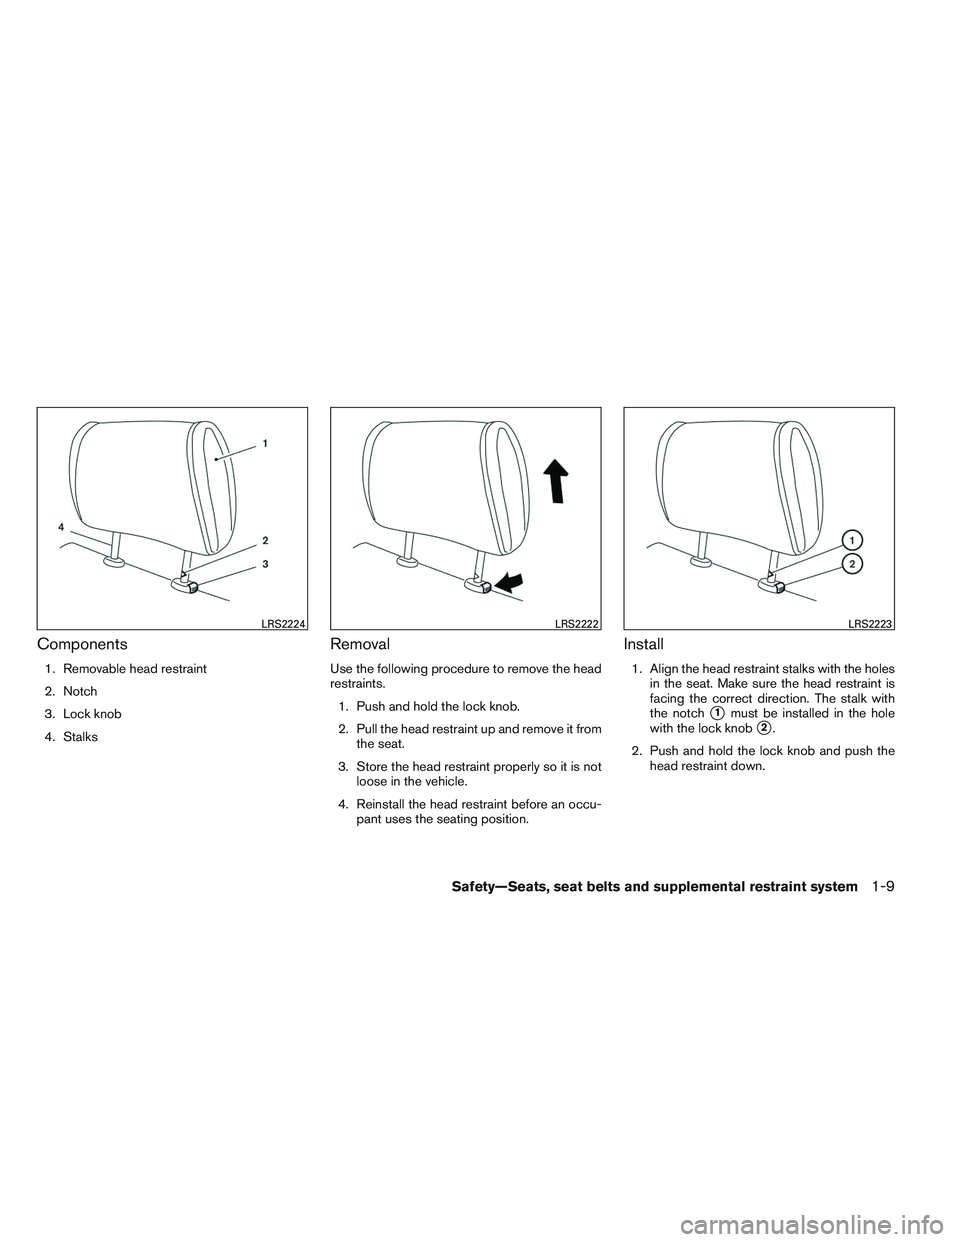 NISSAN VERSA 2013 Owners Manual Components
1. Removable head restraint
2. Notch
3. Lock knob
4. Stalks
Removal
Use the following procedure to remove the head
restraints.1. Push and hold the lock knob.
2. Pull the head restraint up a